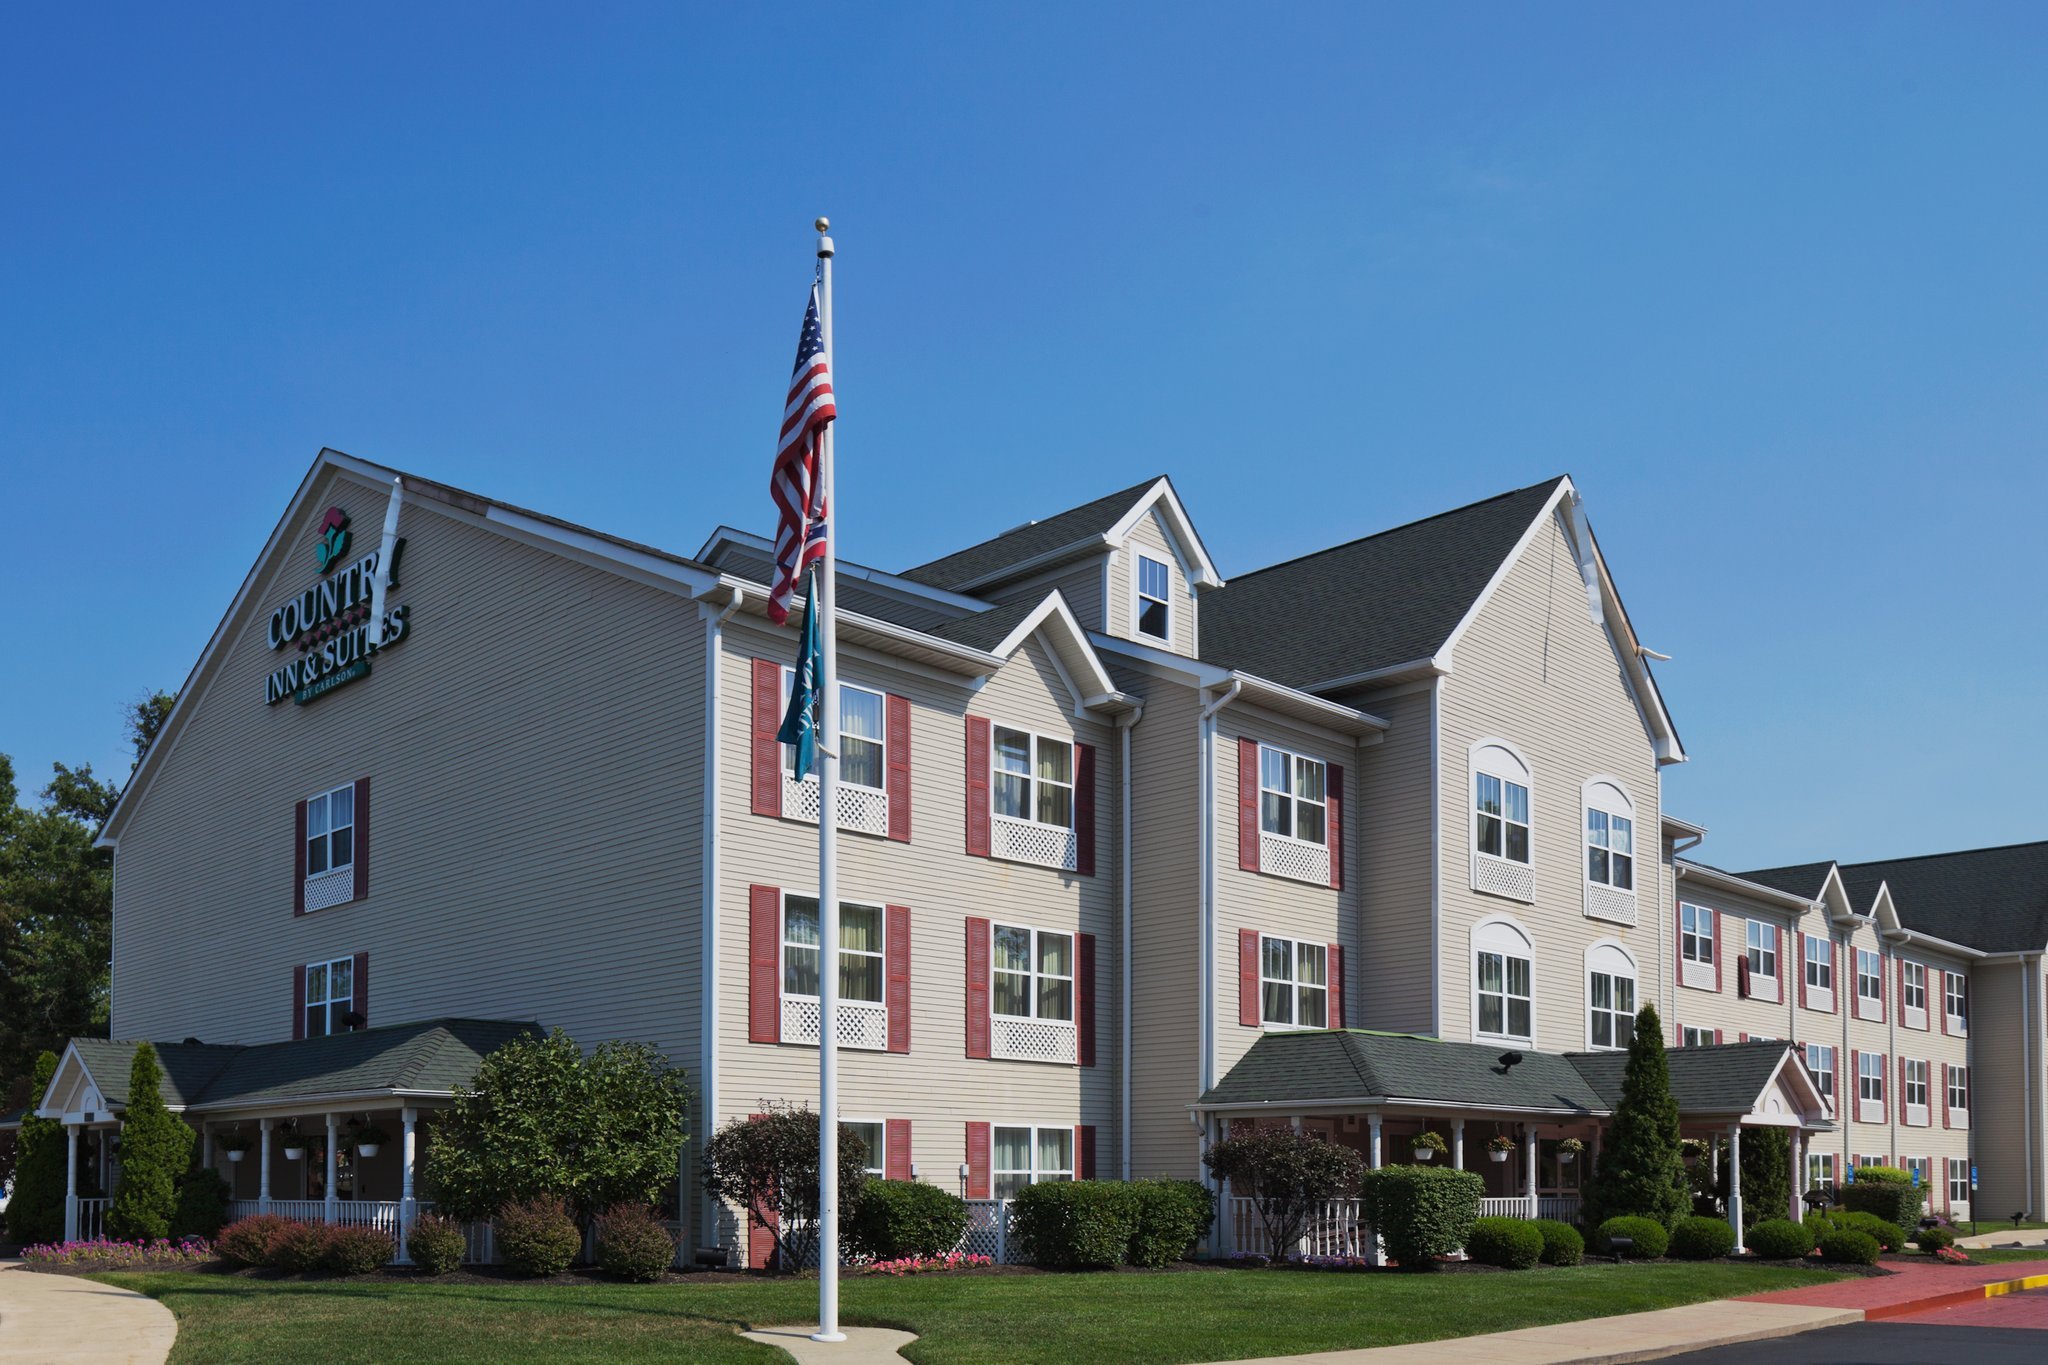 Photo of Country Inn & Suites Columbus Airport East, Columbus, OH